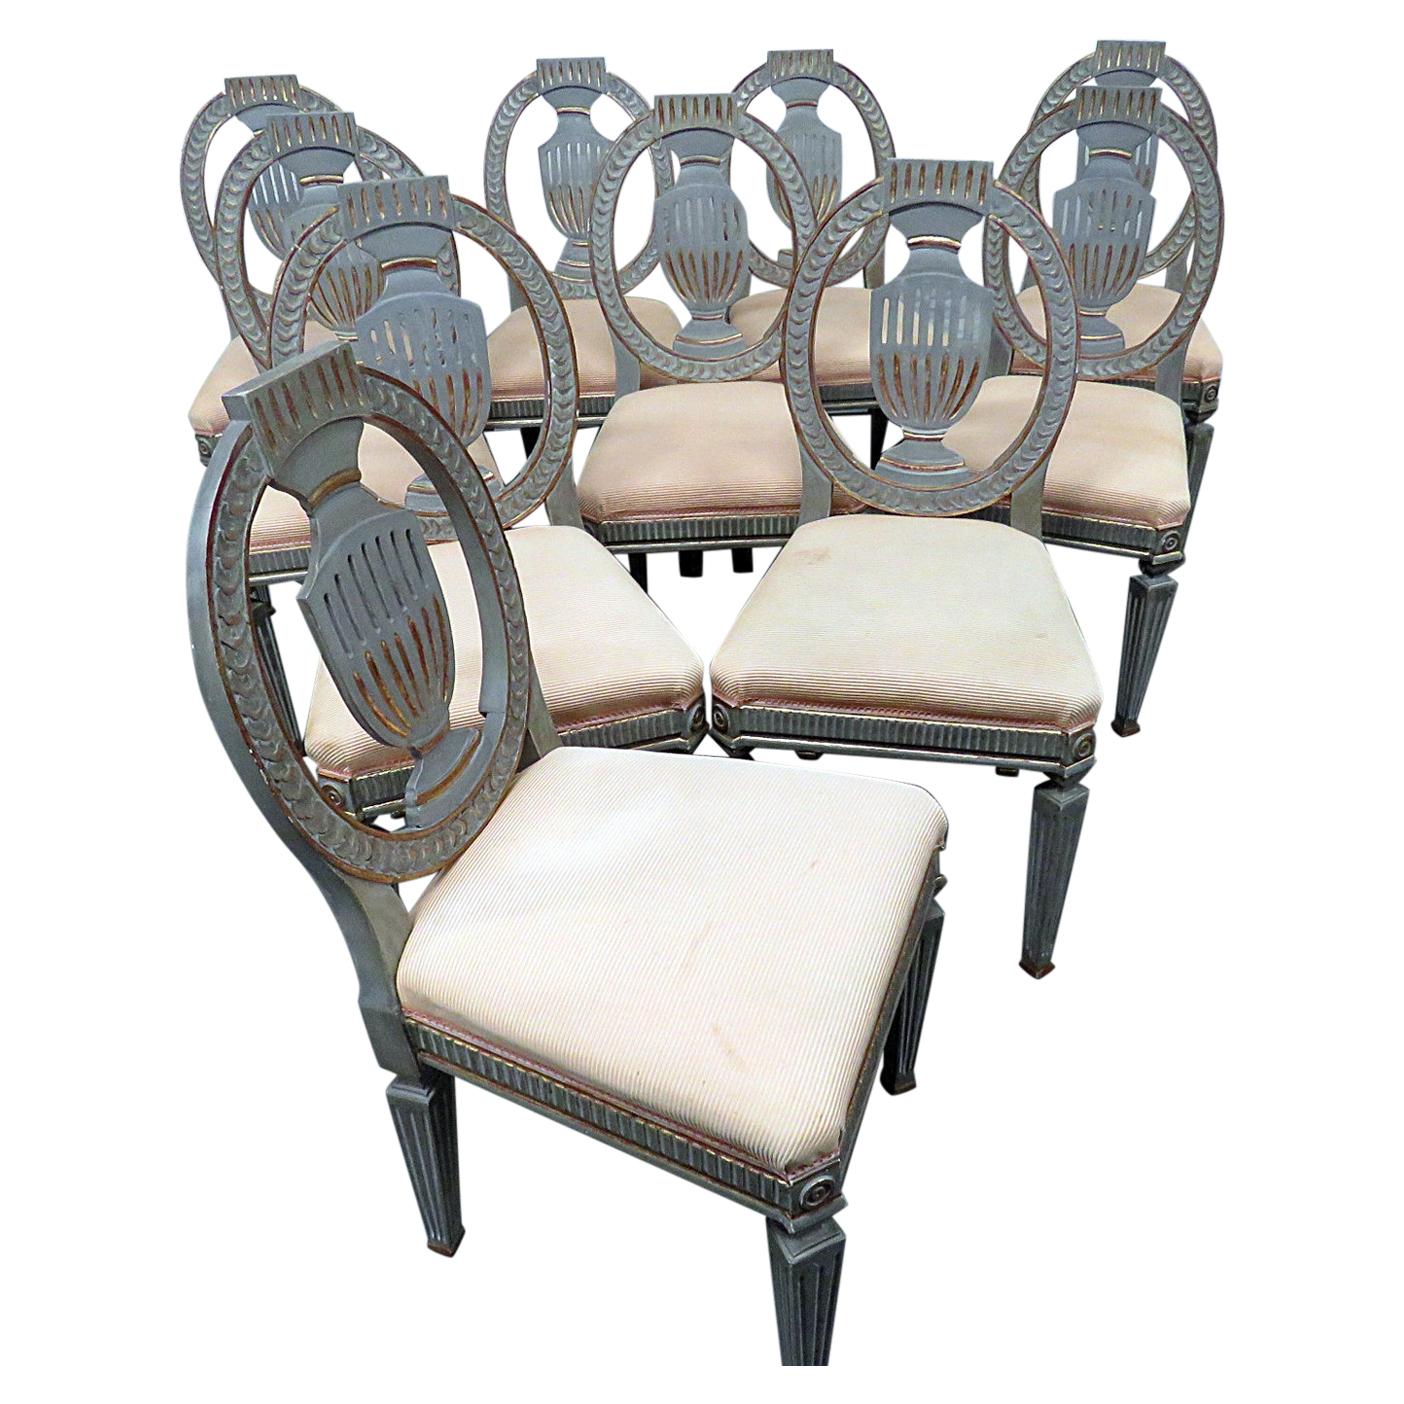 Set of 10 Swedish or Gustavian Painted & Gilded Style Side Dining Chairs